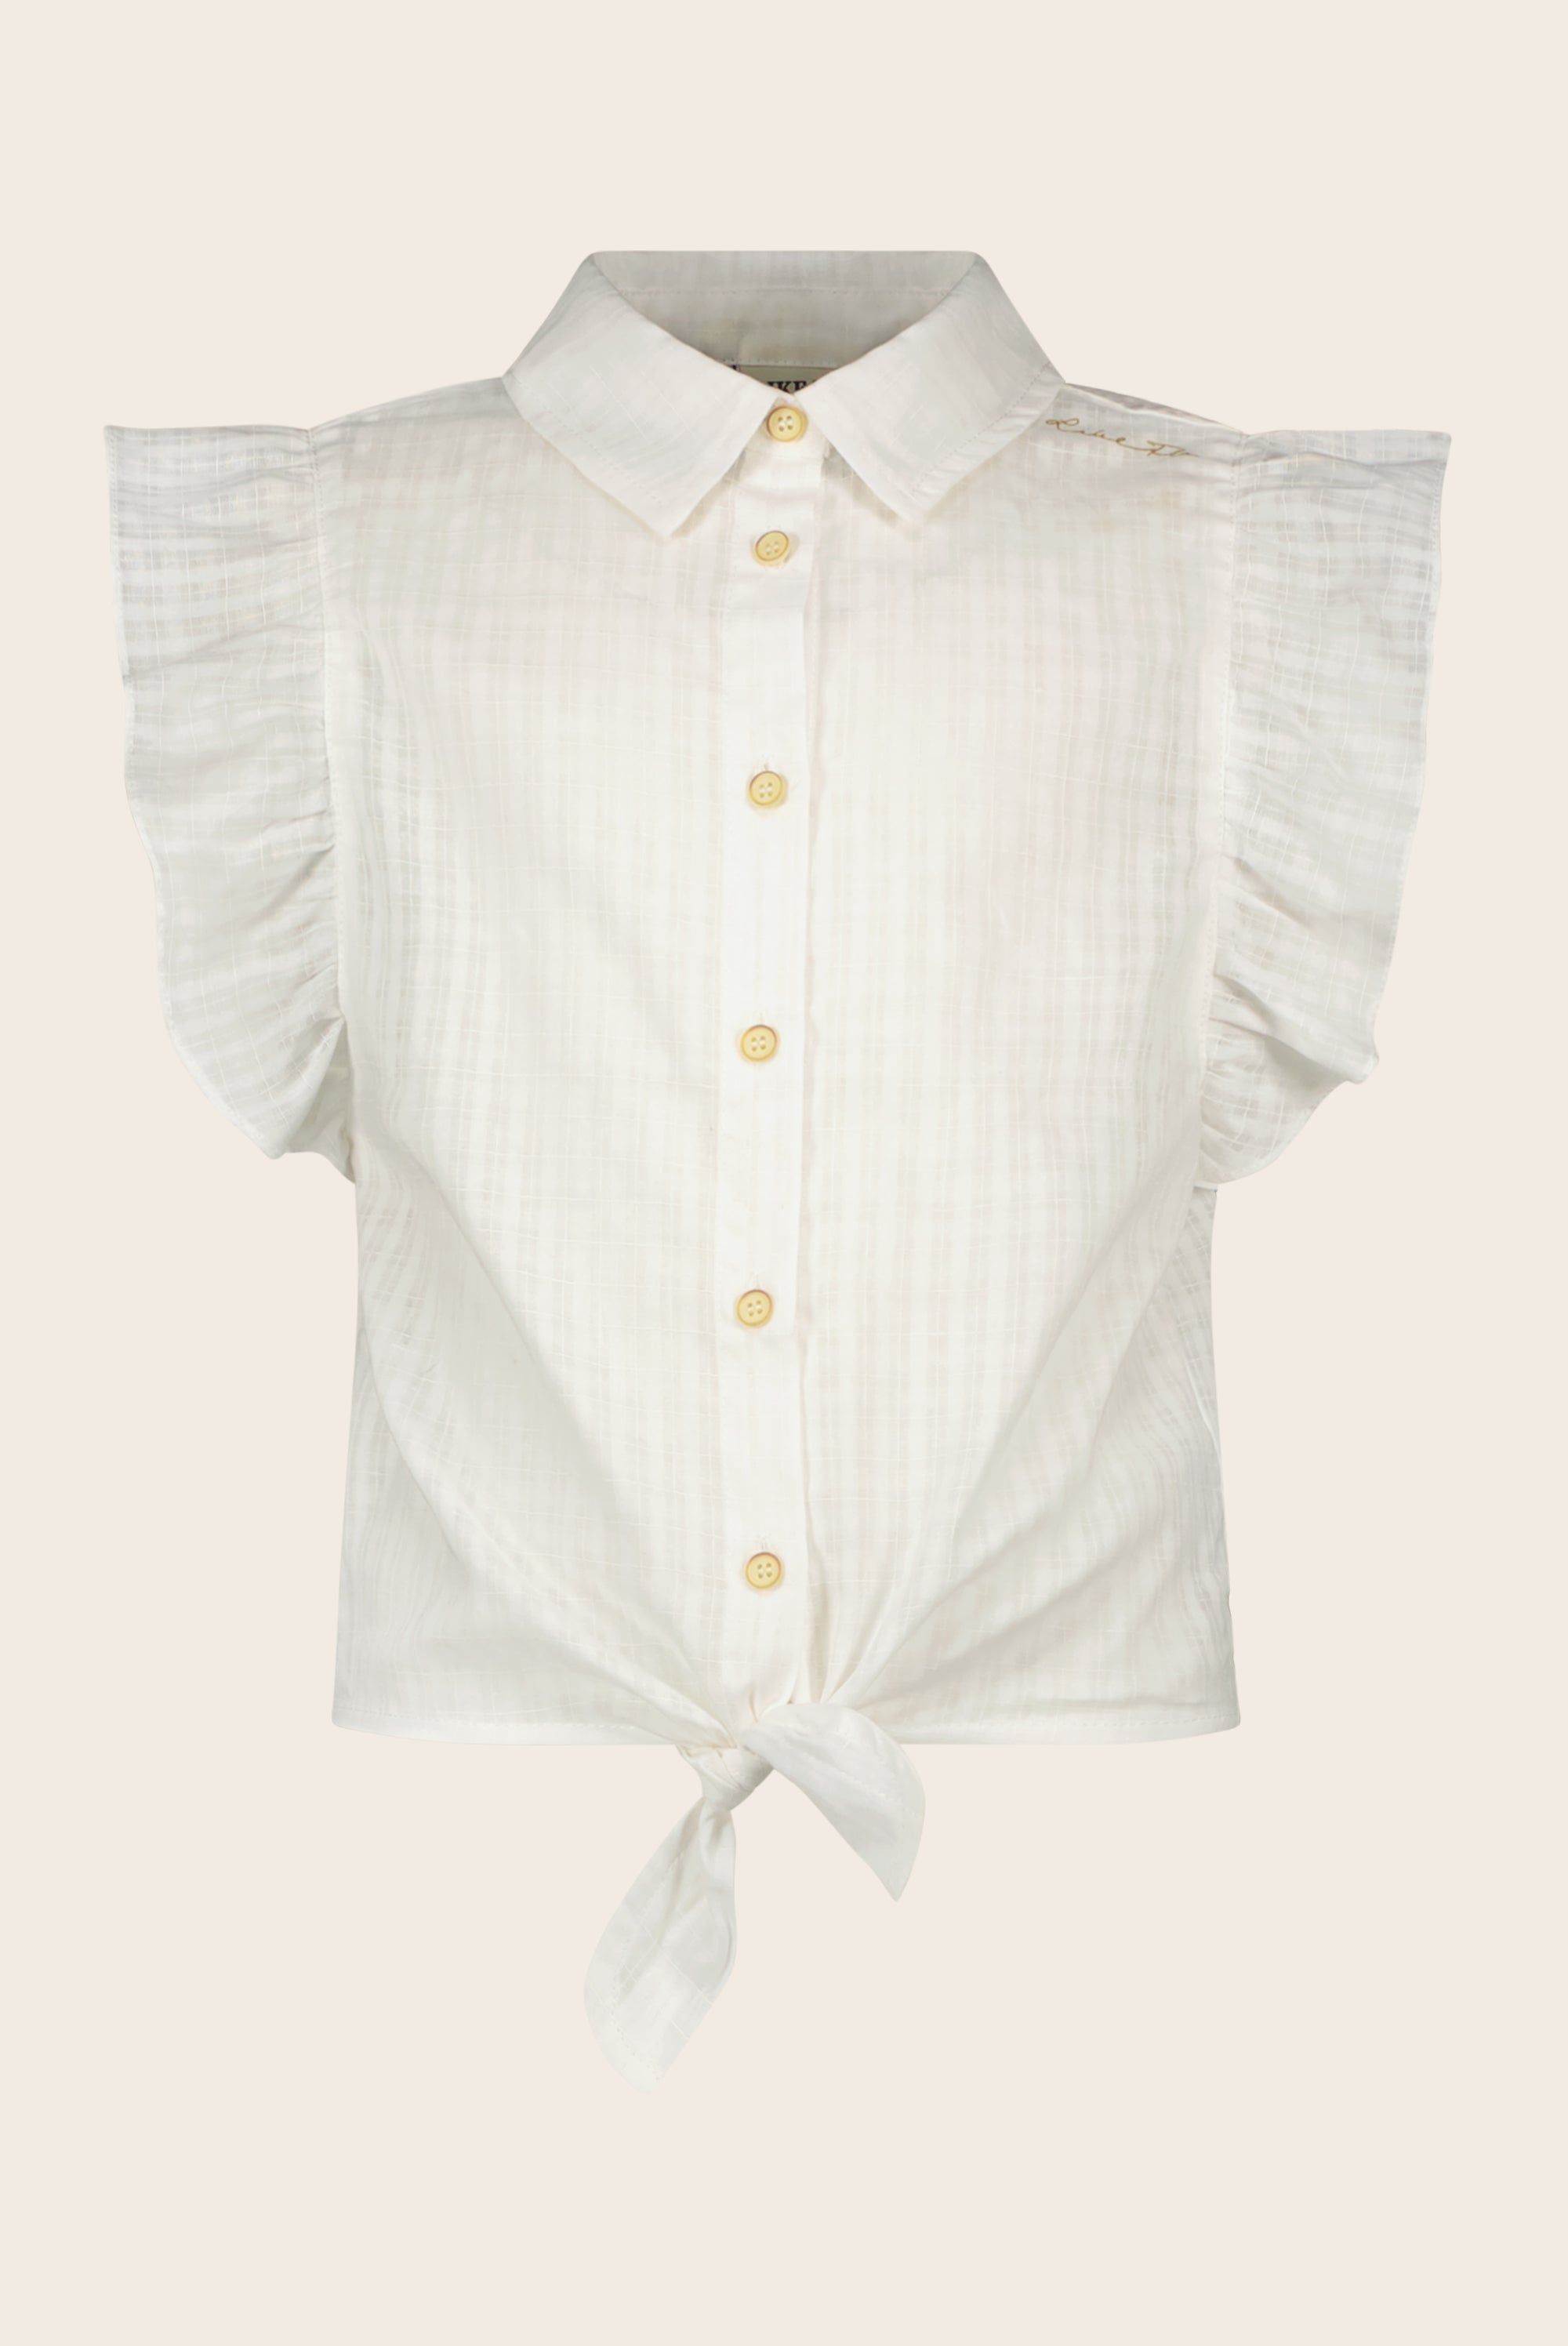 Flo girls solid check knotted blouse